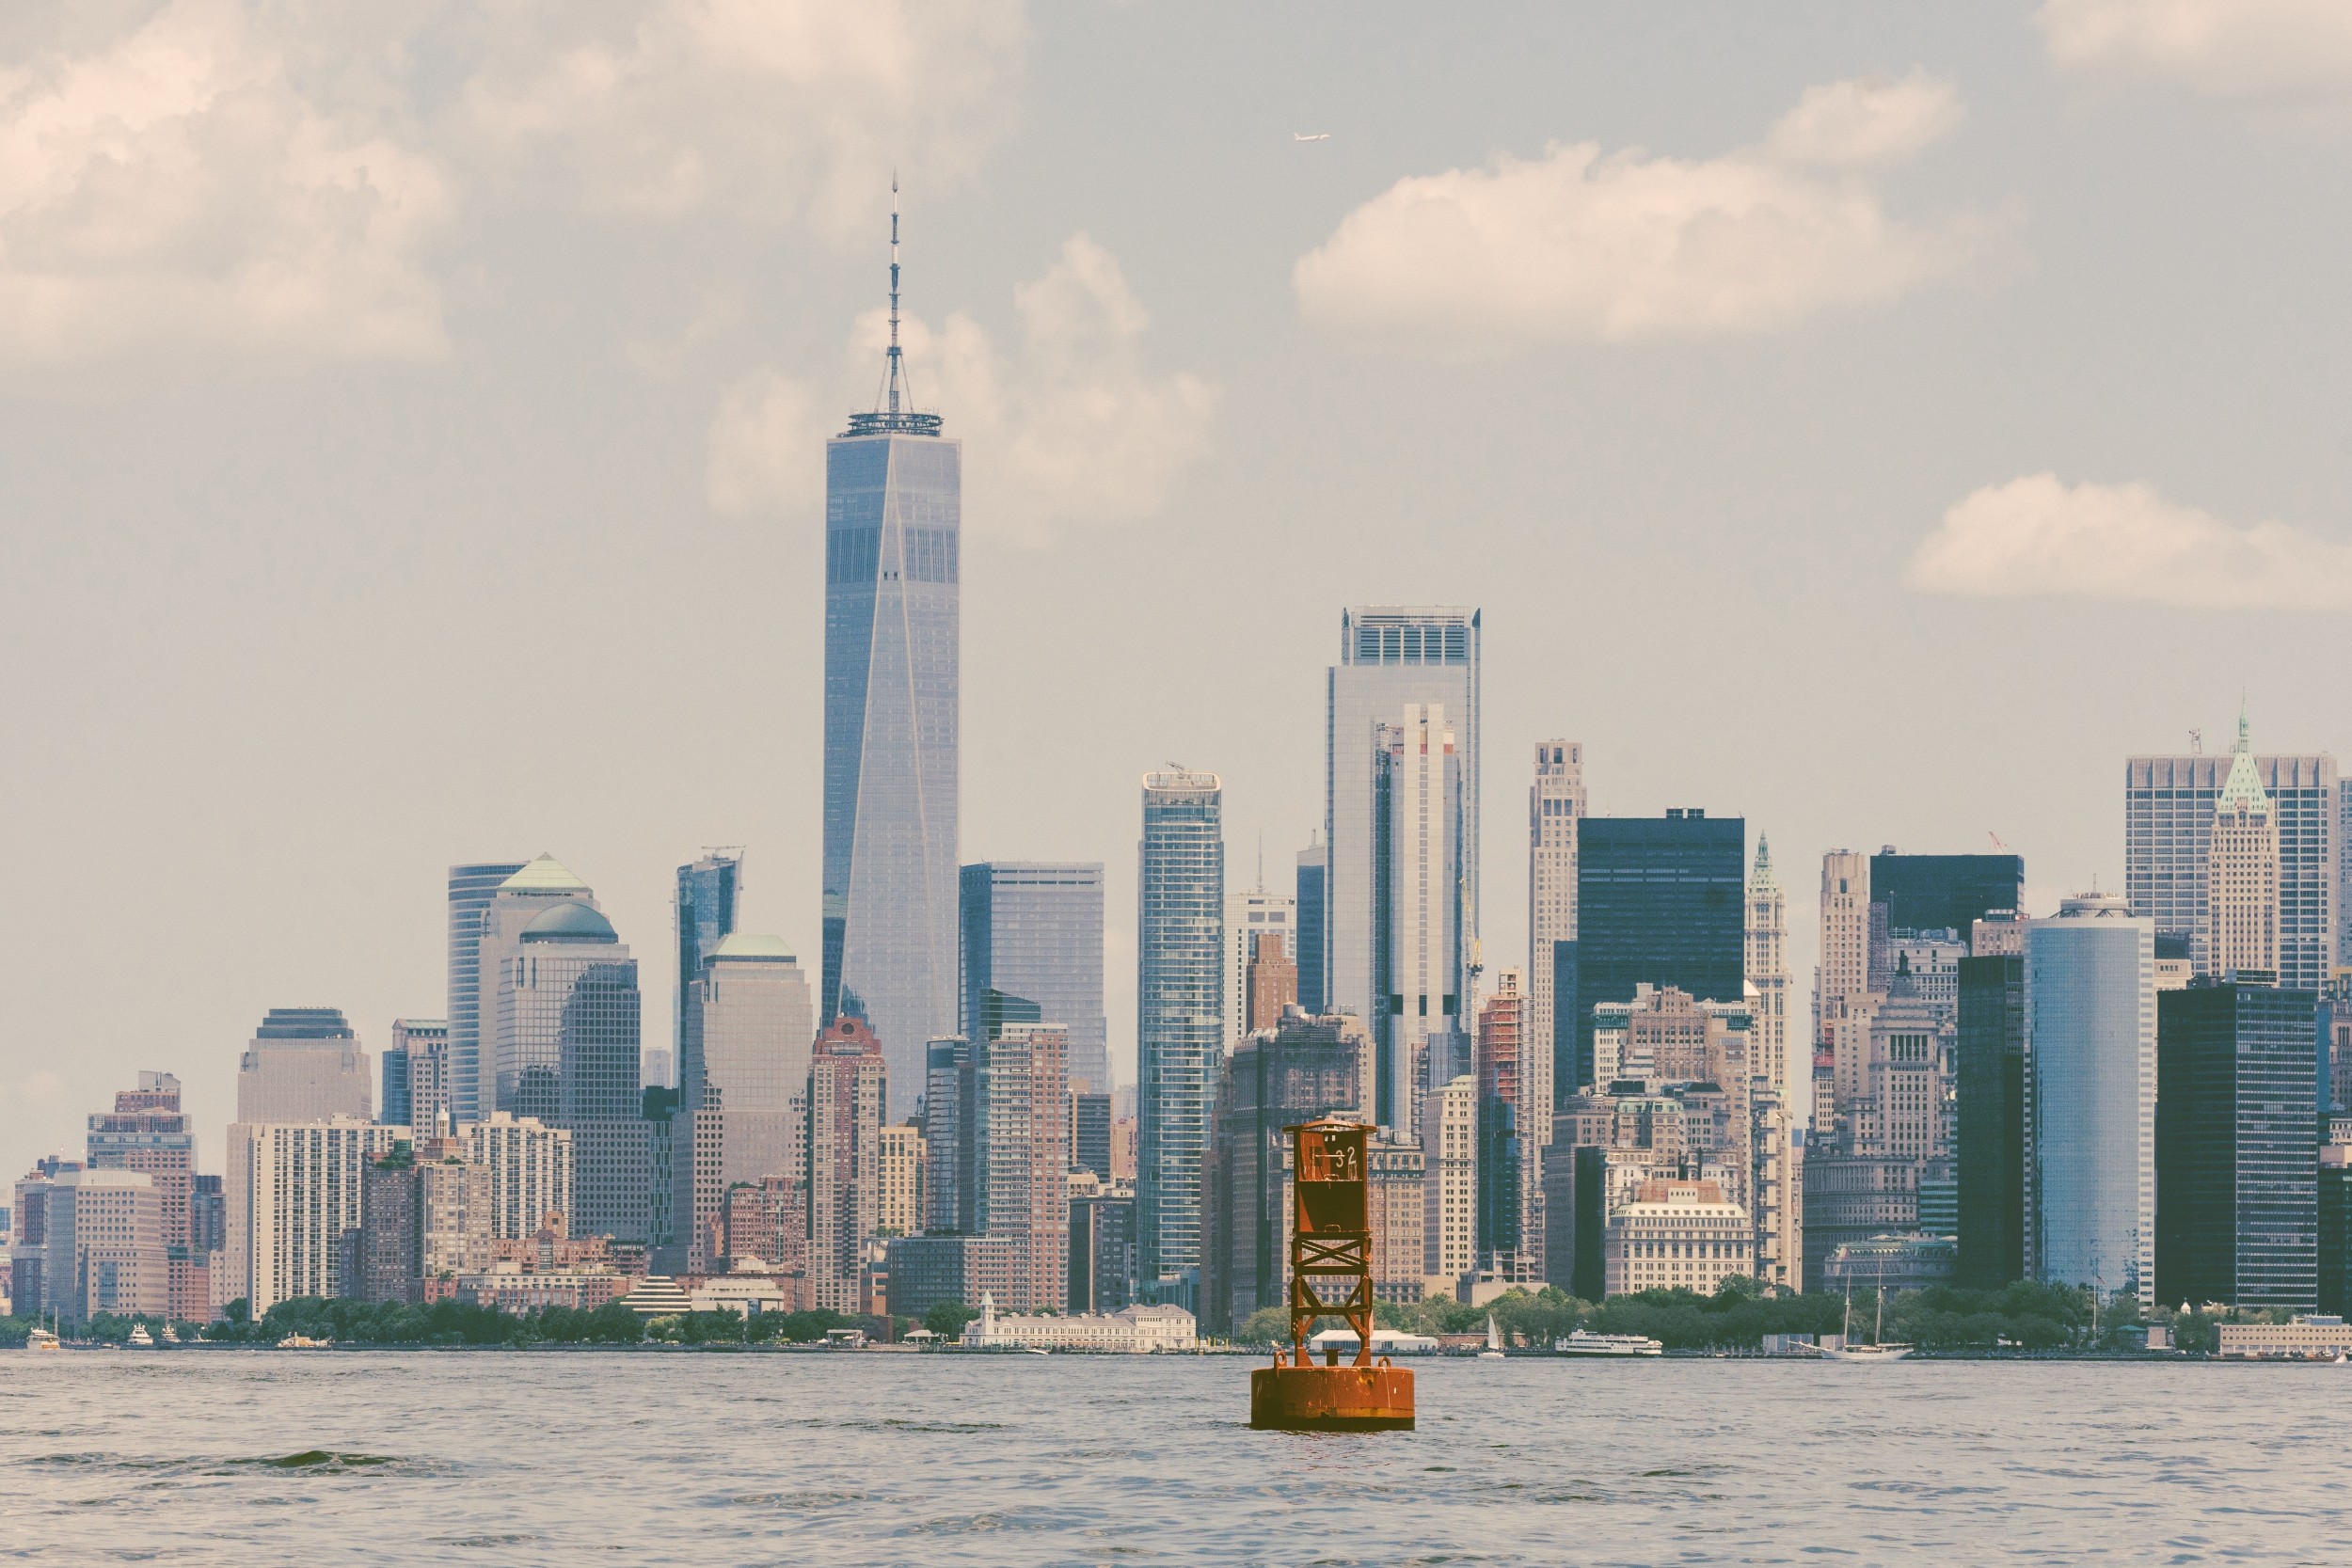 The World Trade Center as seen from New York Harbor